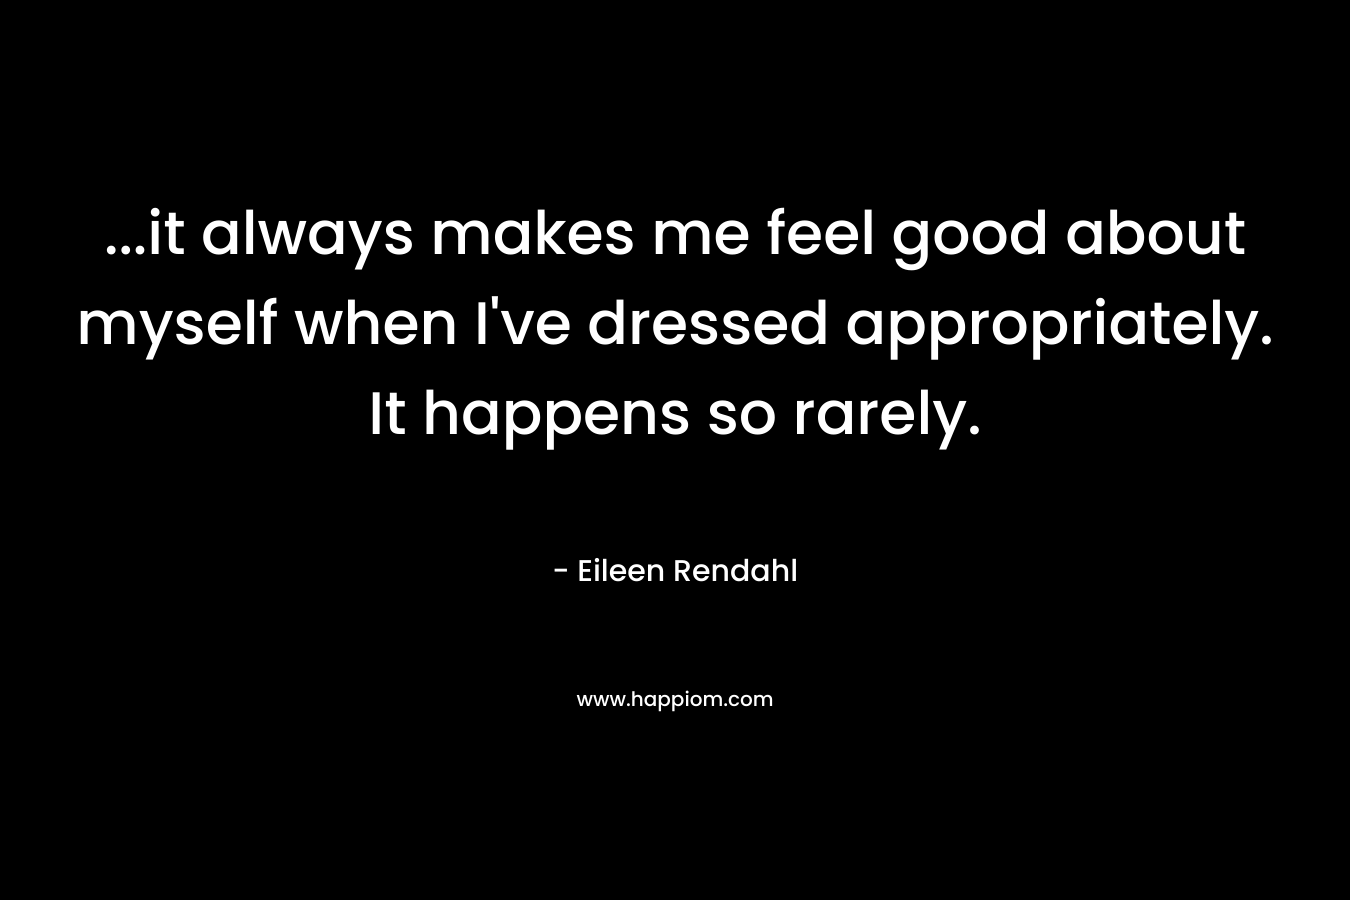 ...it always makes me feel good about myself when I've dressed appropriately. It happens so rarely.